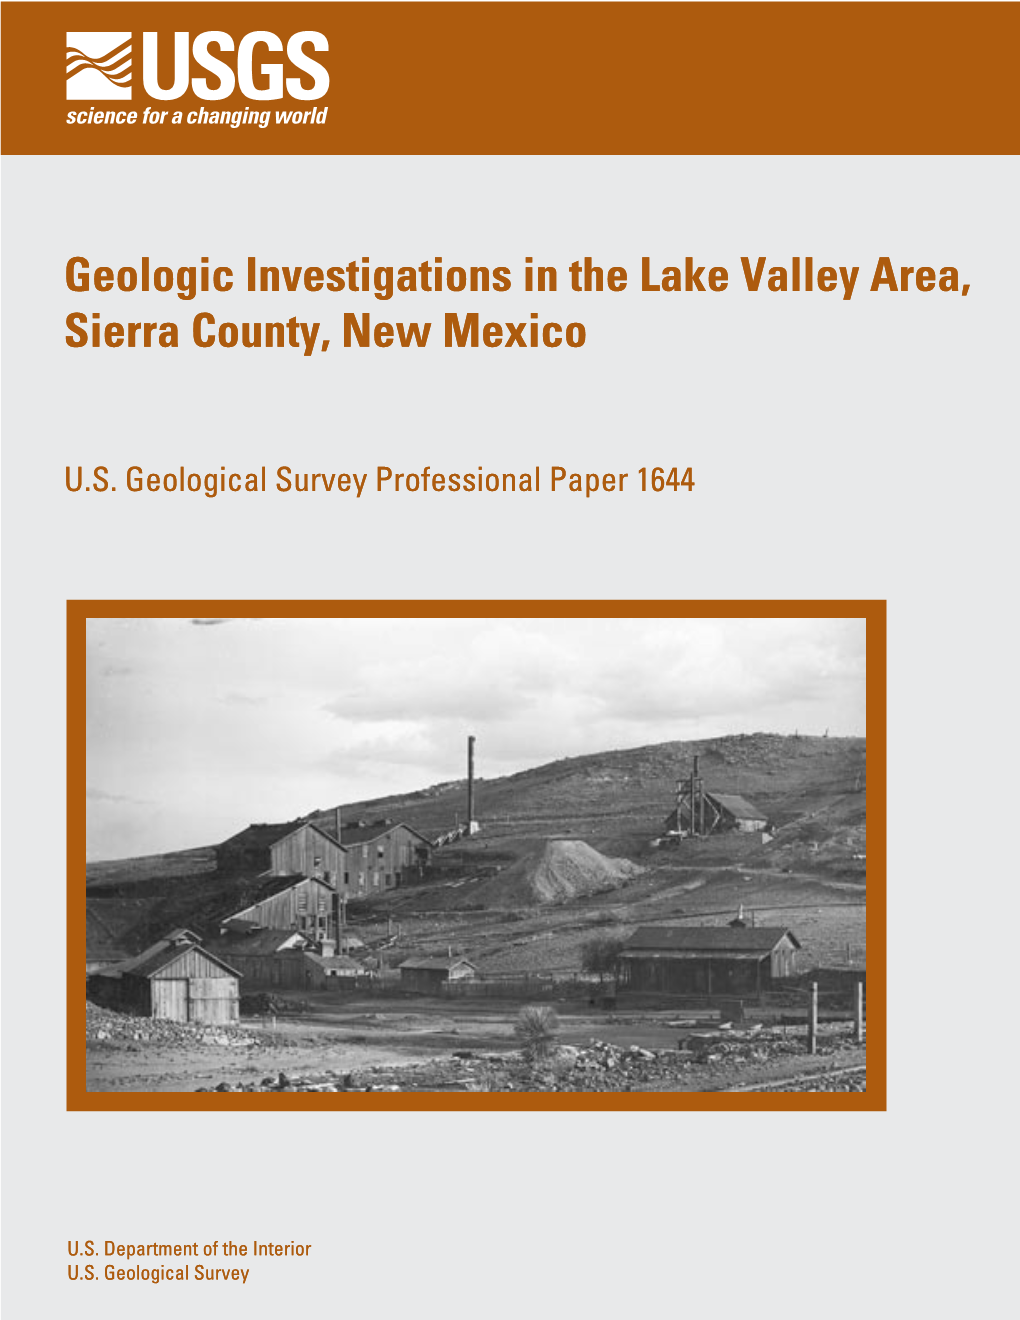 Geologic Investigations in the Lake Valley Area, Sierra County, New Mexico